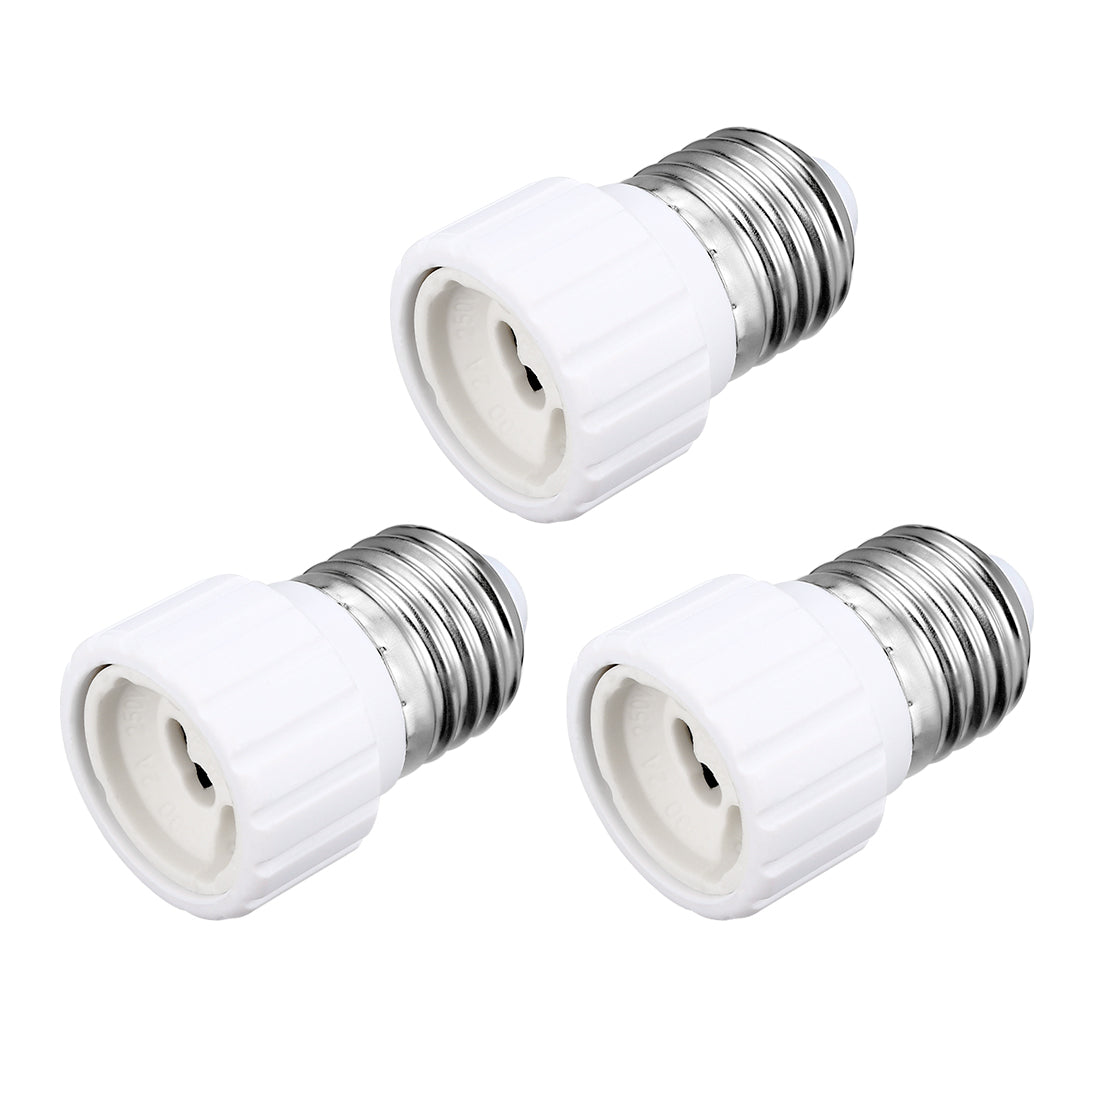 uxcell Uxcell 3pcs AC 250V 2A E27 to GU10 Socket Adapter PBT Lamp Bulb Holder 200 Degree Heat Resistant